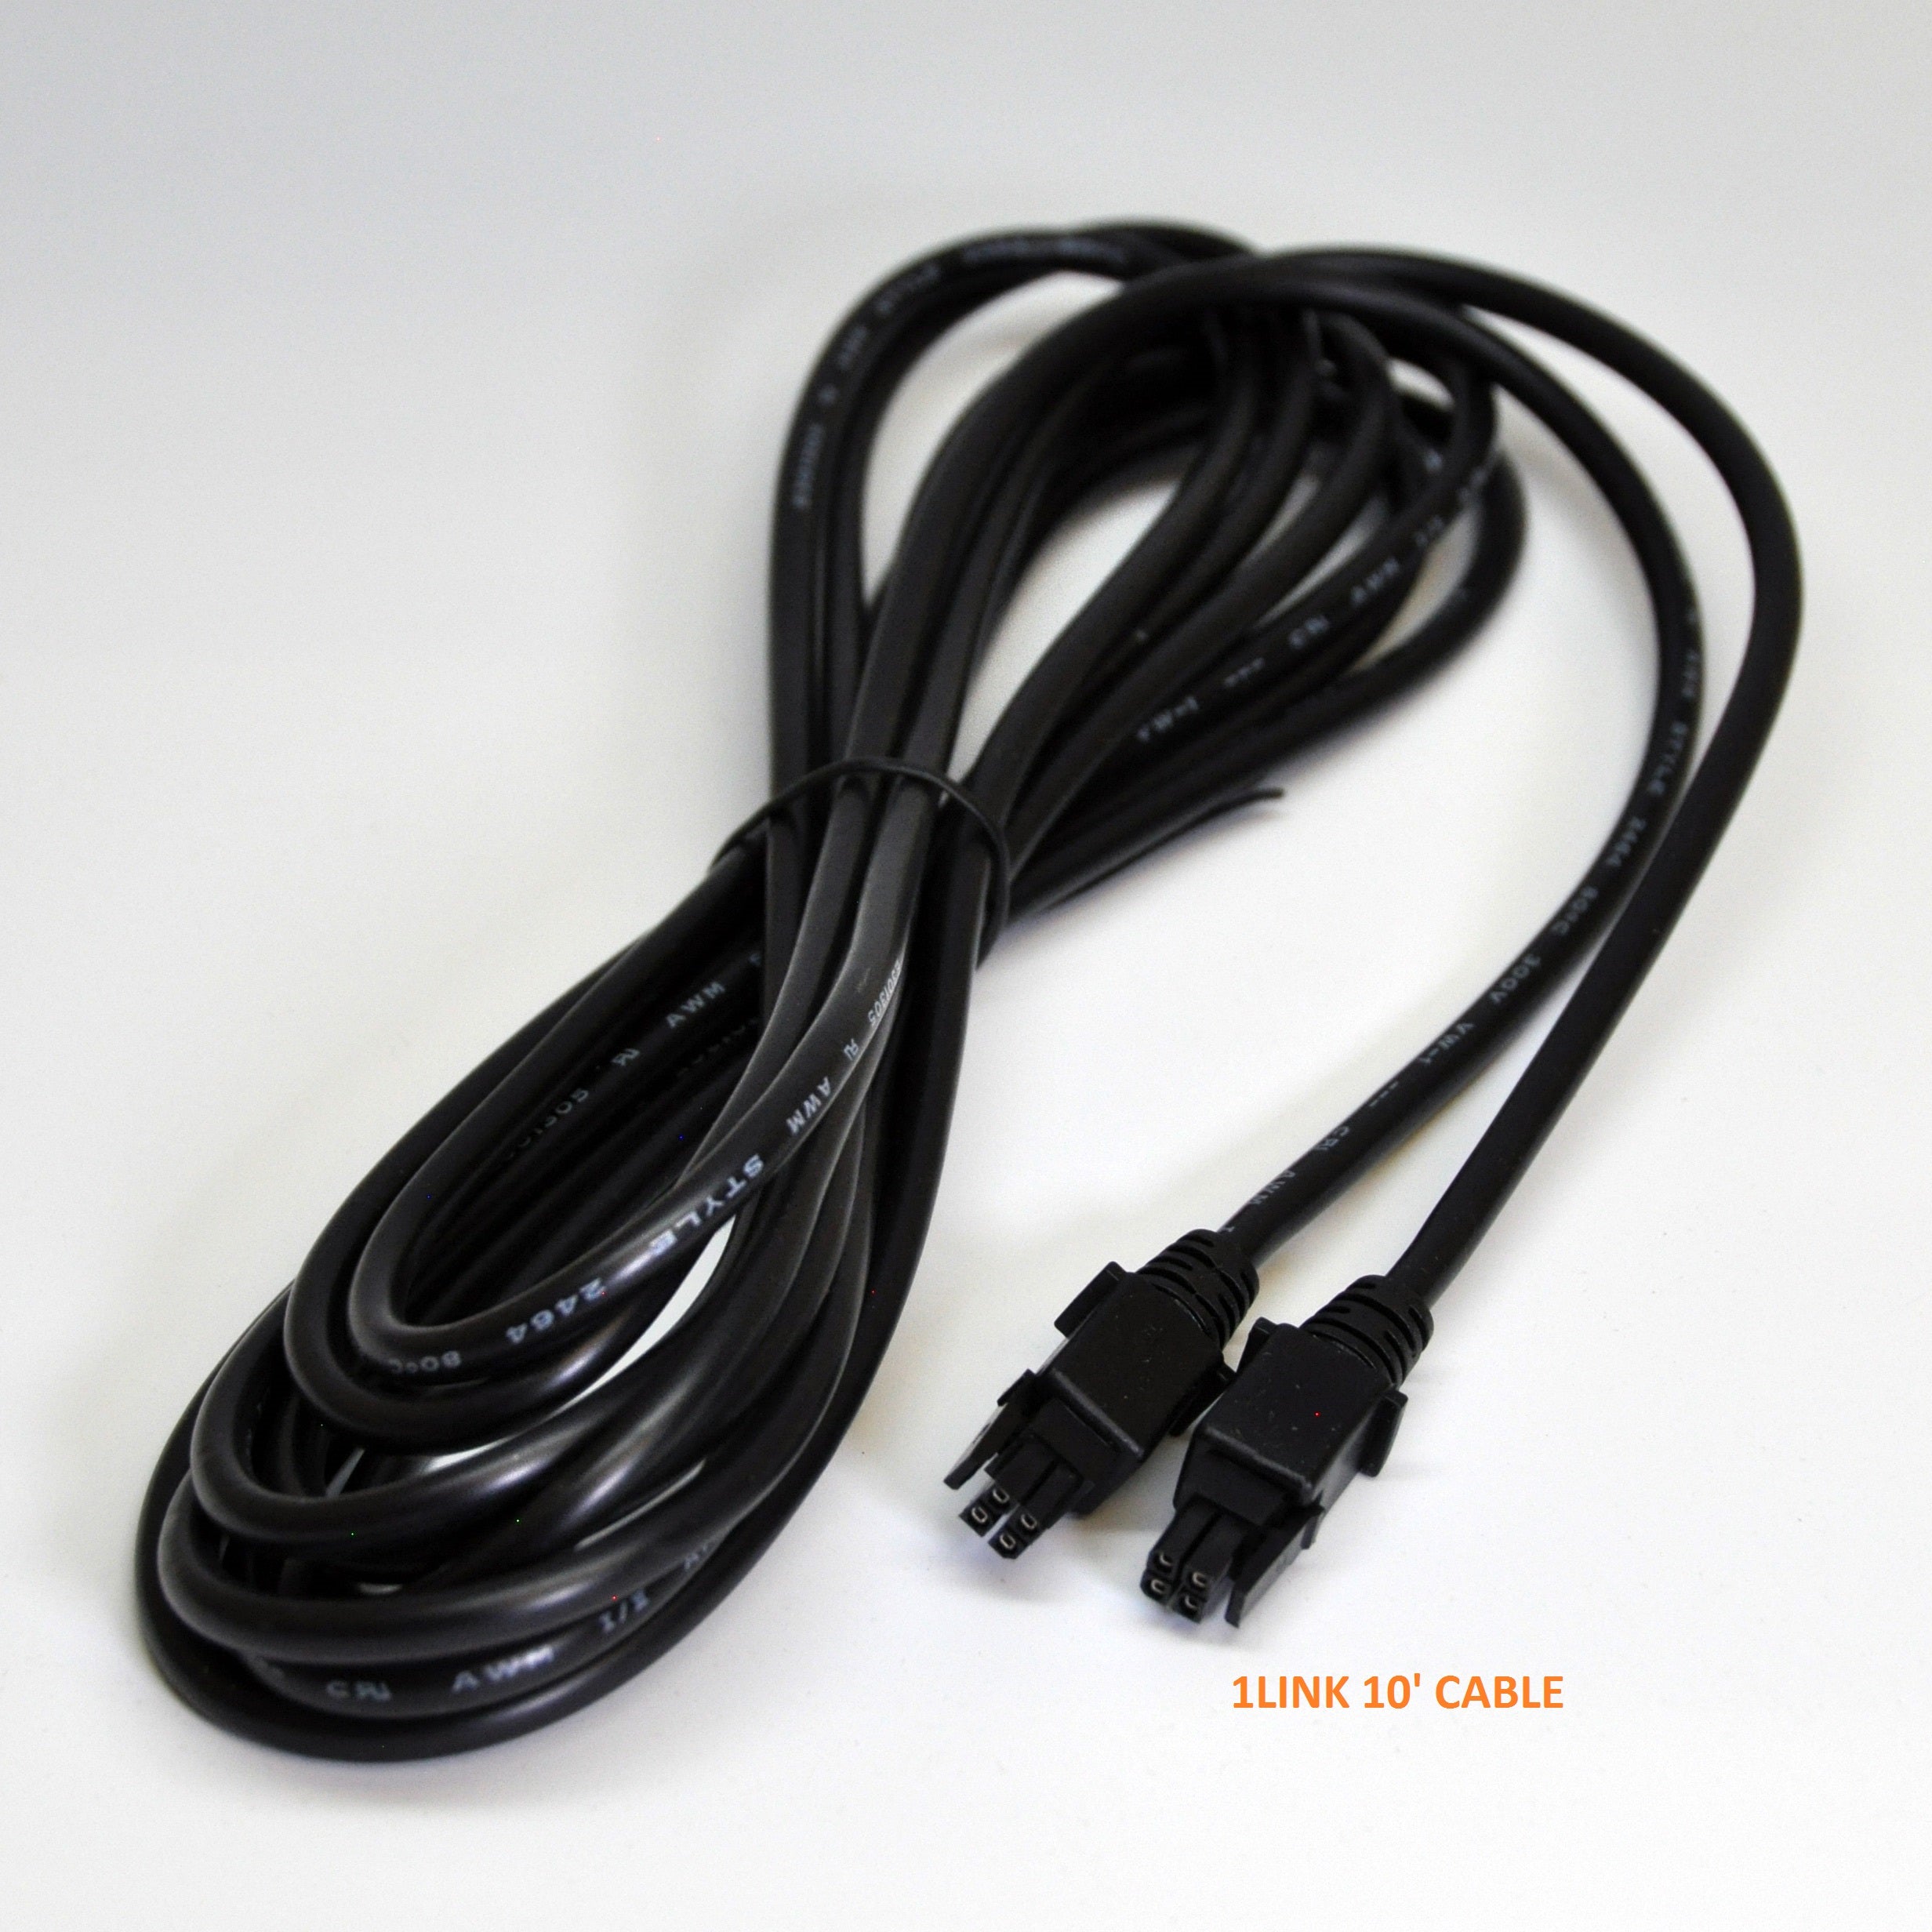 Neptune Systems 1LINK Male – Male cable – 10’